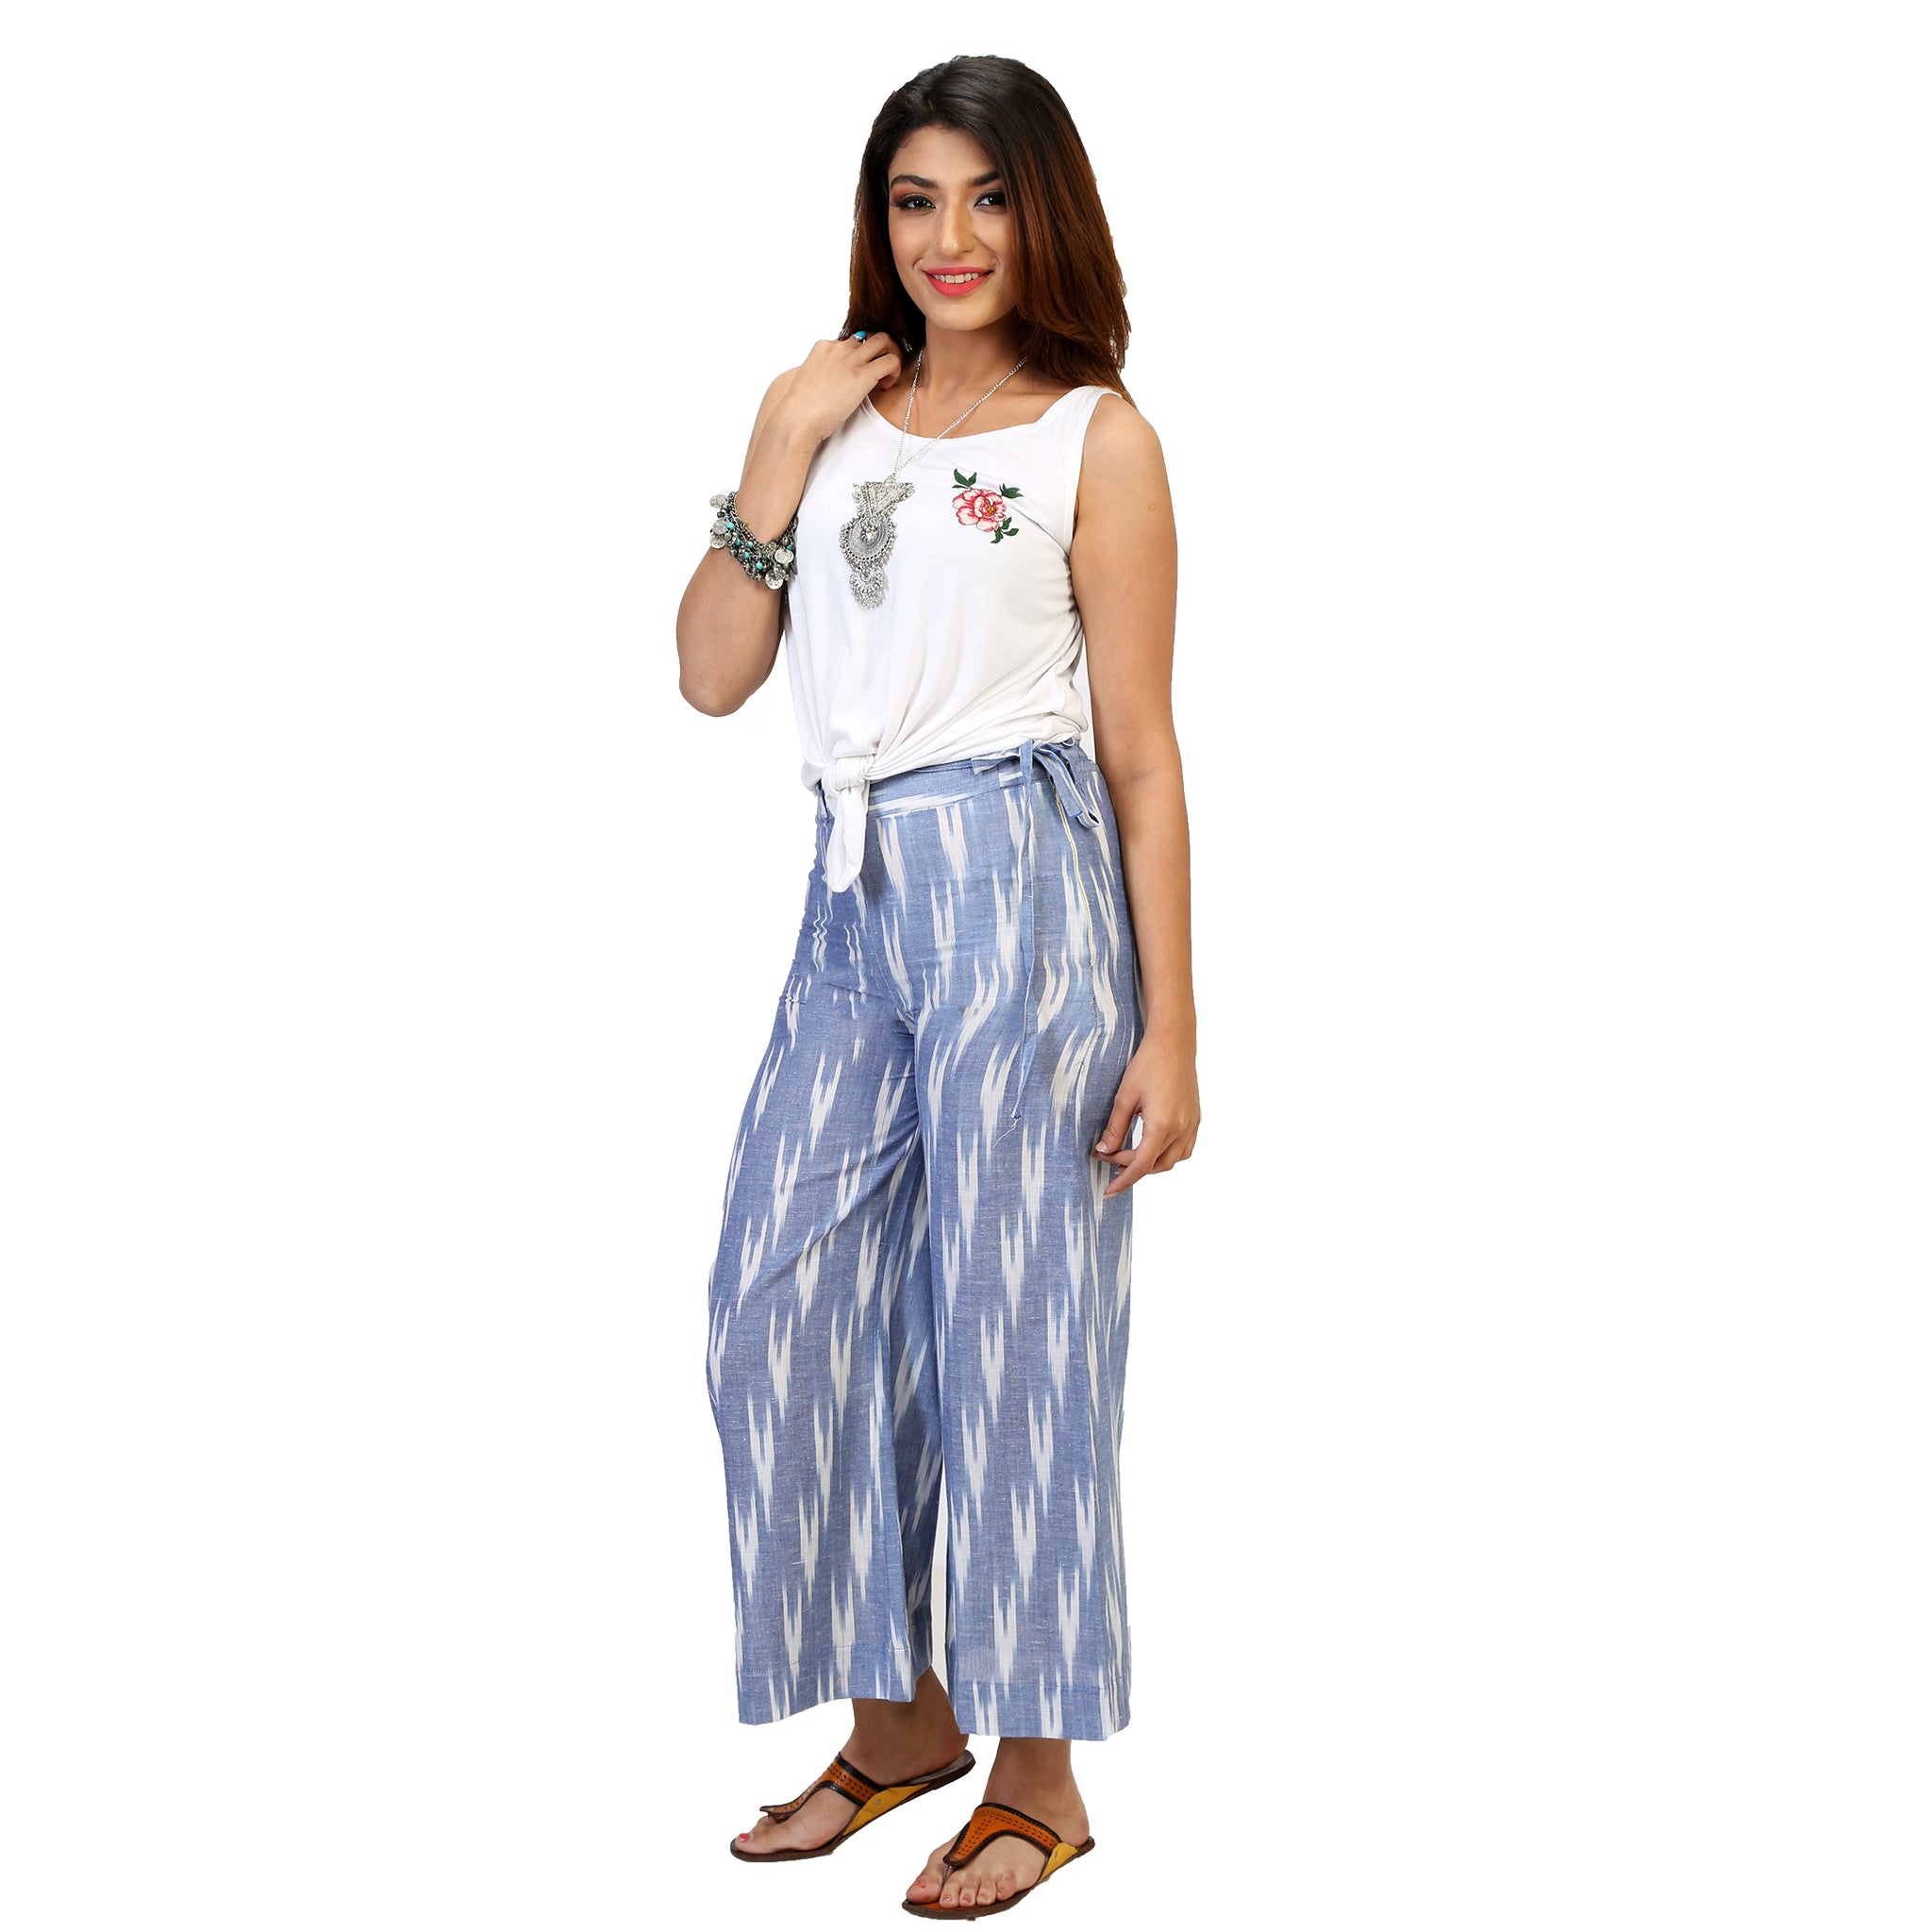 Buy Green Floral Kali Palazzo Pants Online At Best Price - Sassafras.in